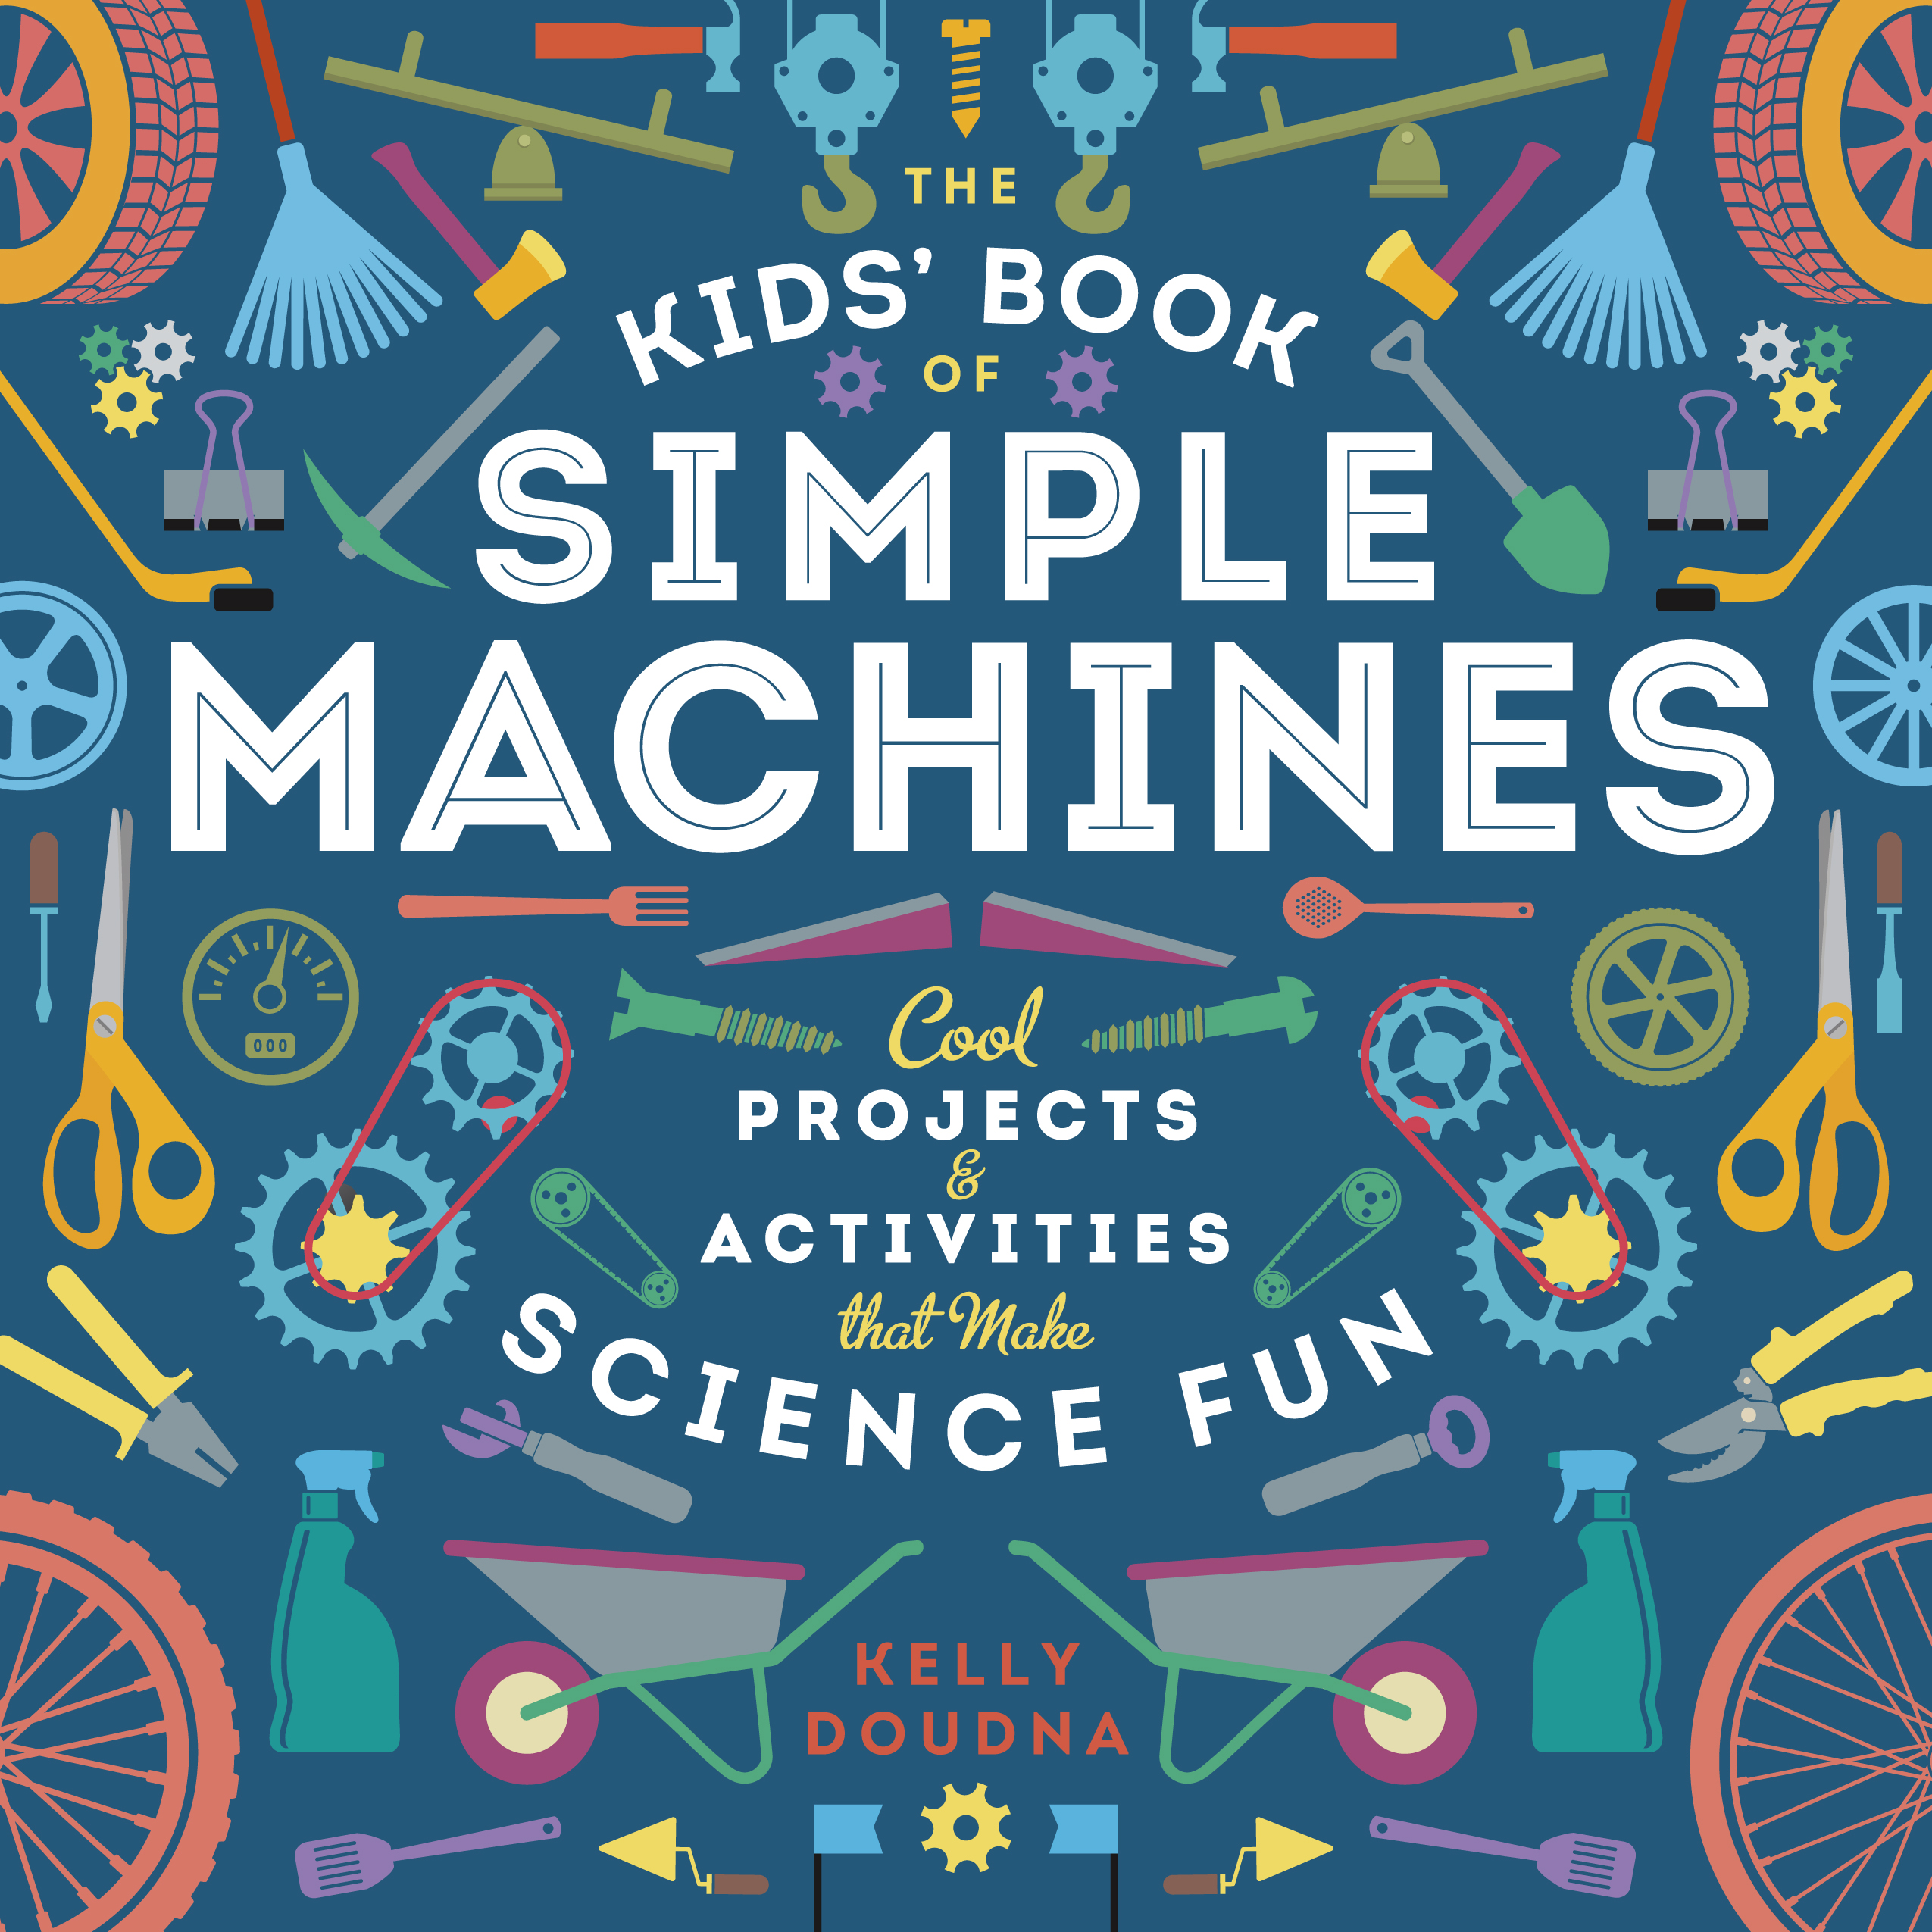 The Kids’ Book of Simple Machines